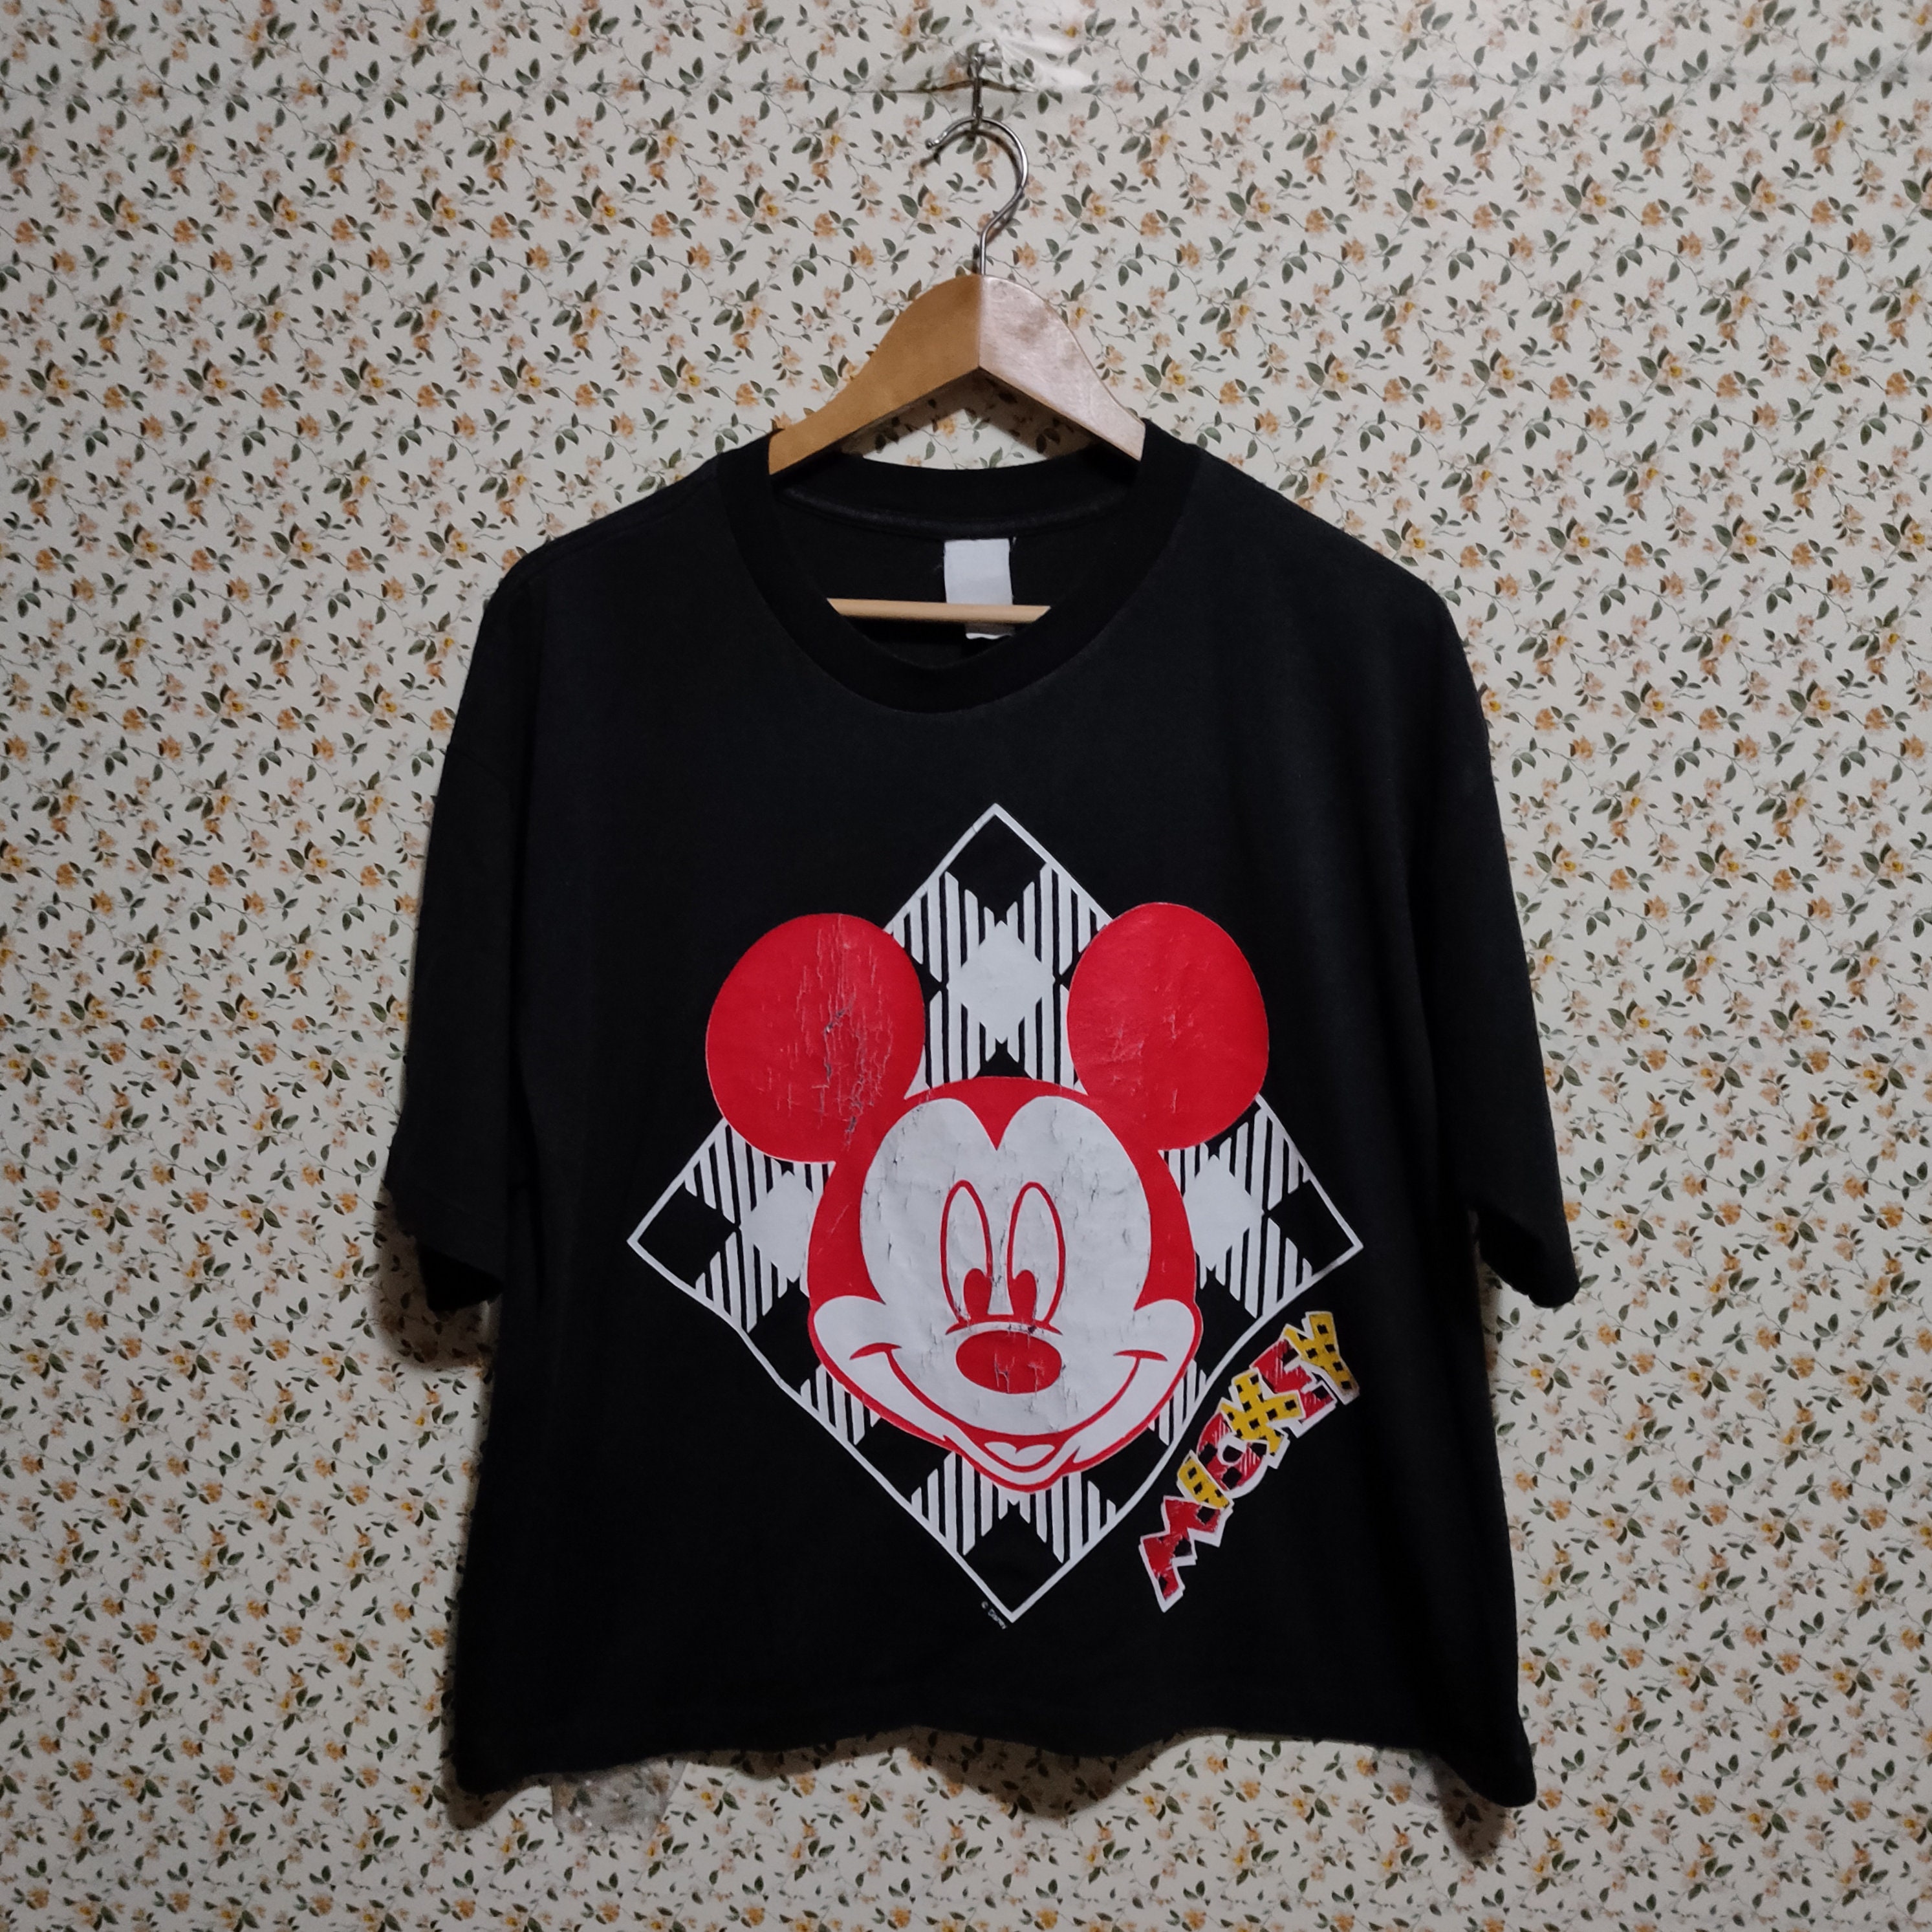 90s Vintage Disney Mickey Mouse T-shirt Black With Checkered - Etsy